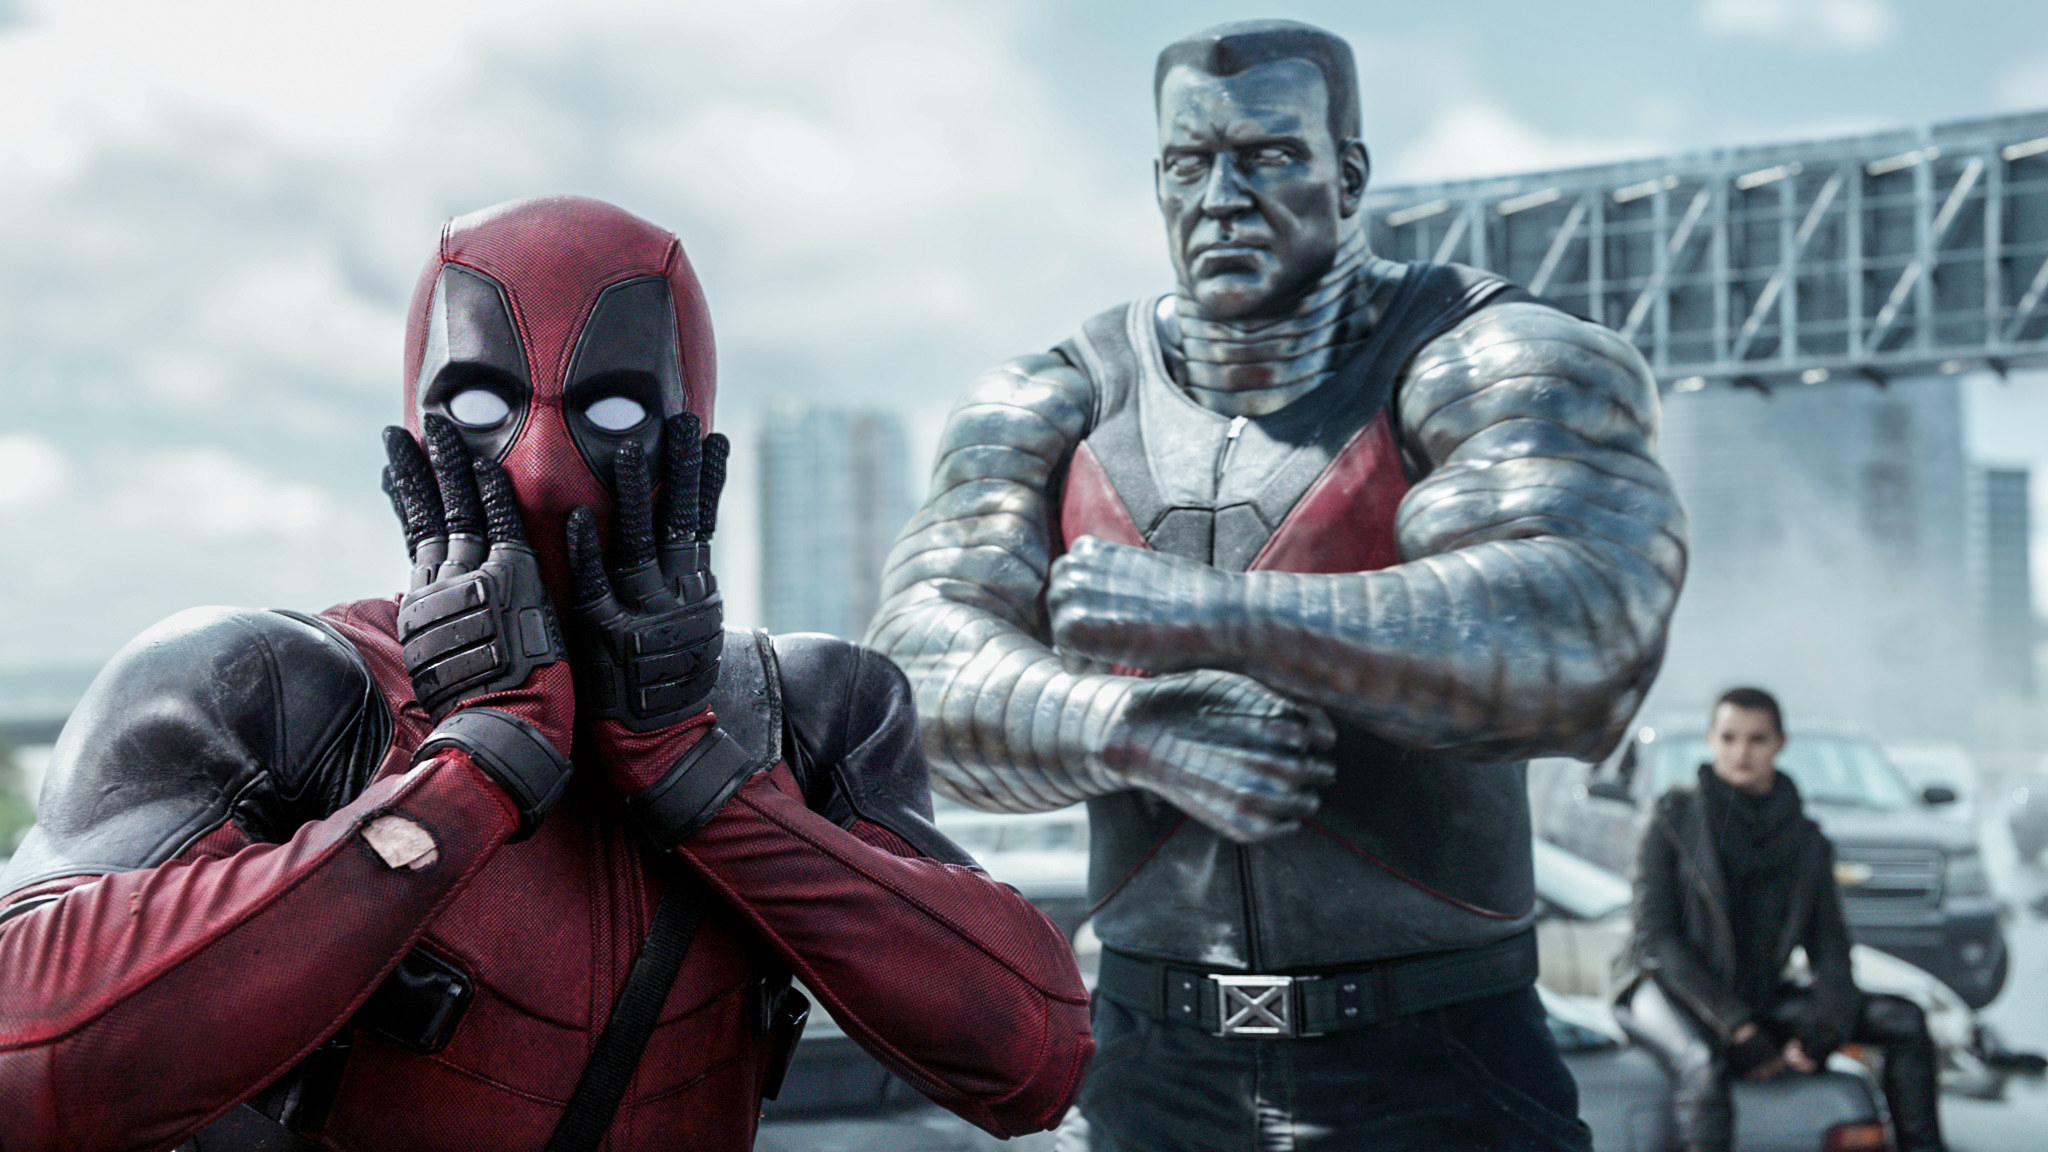 Deadpool with Colossus